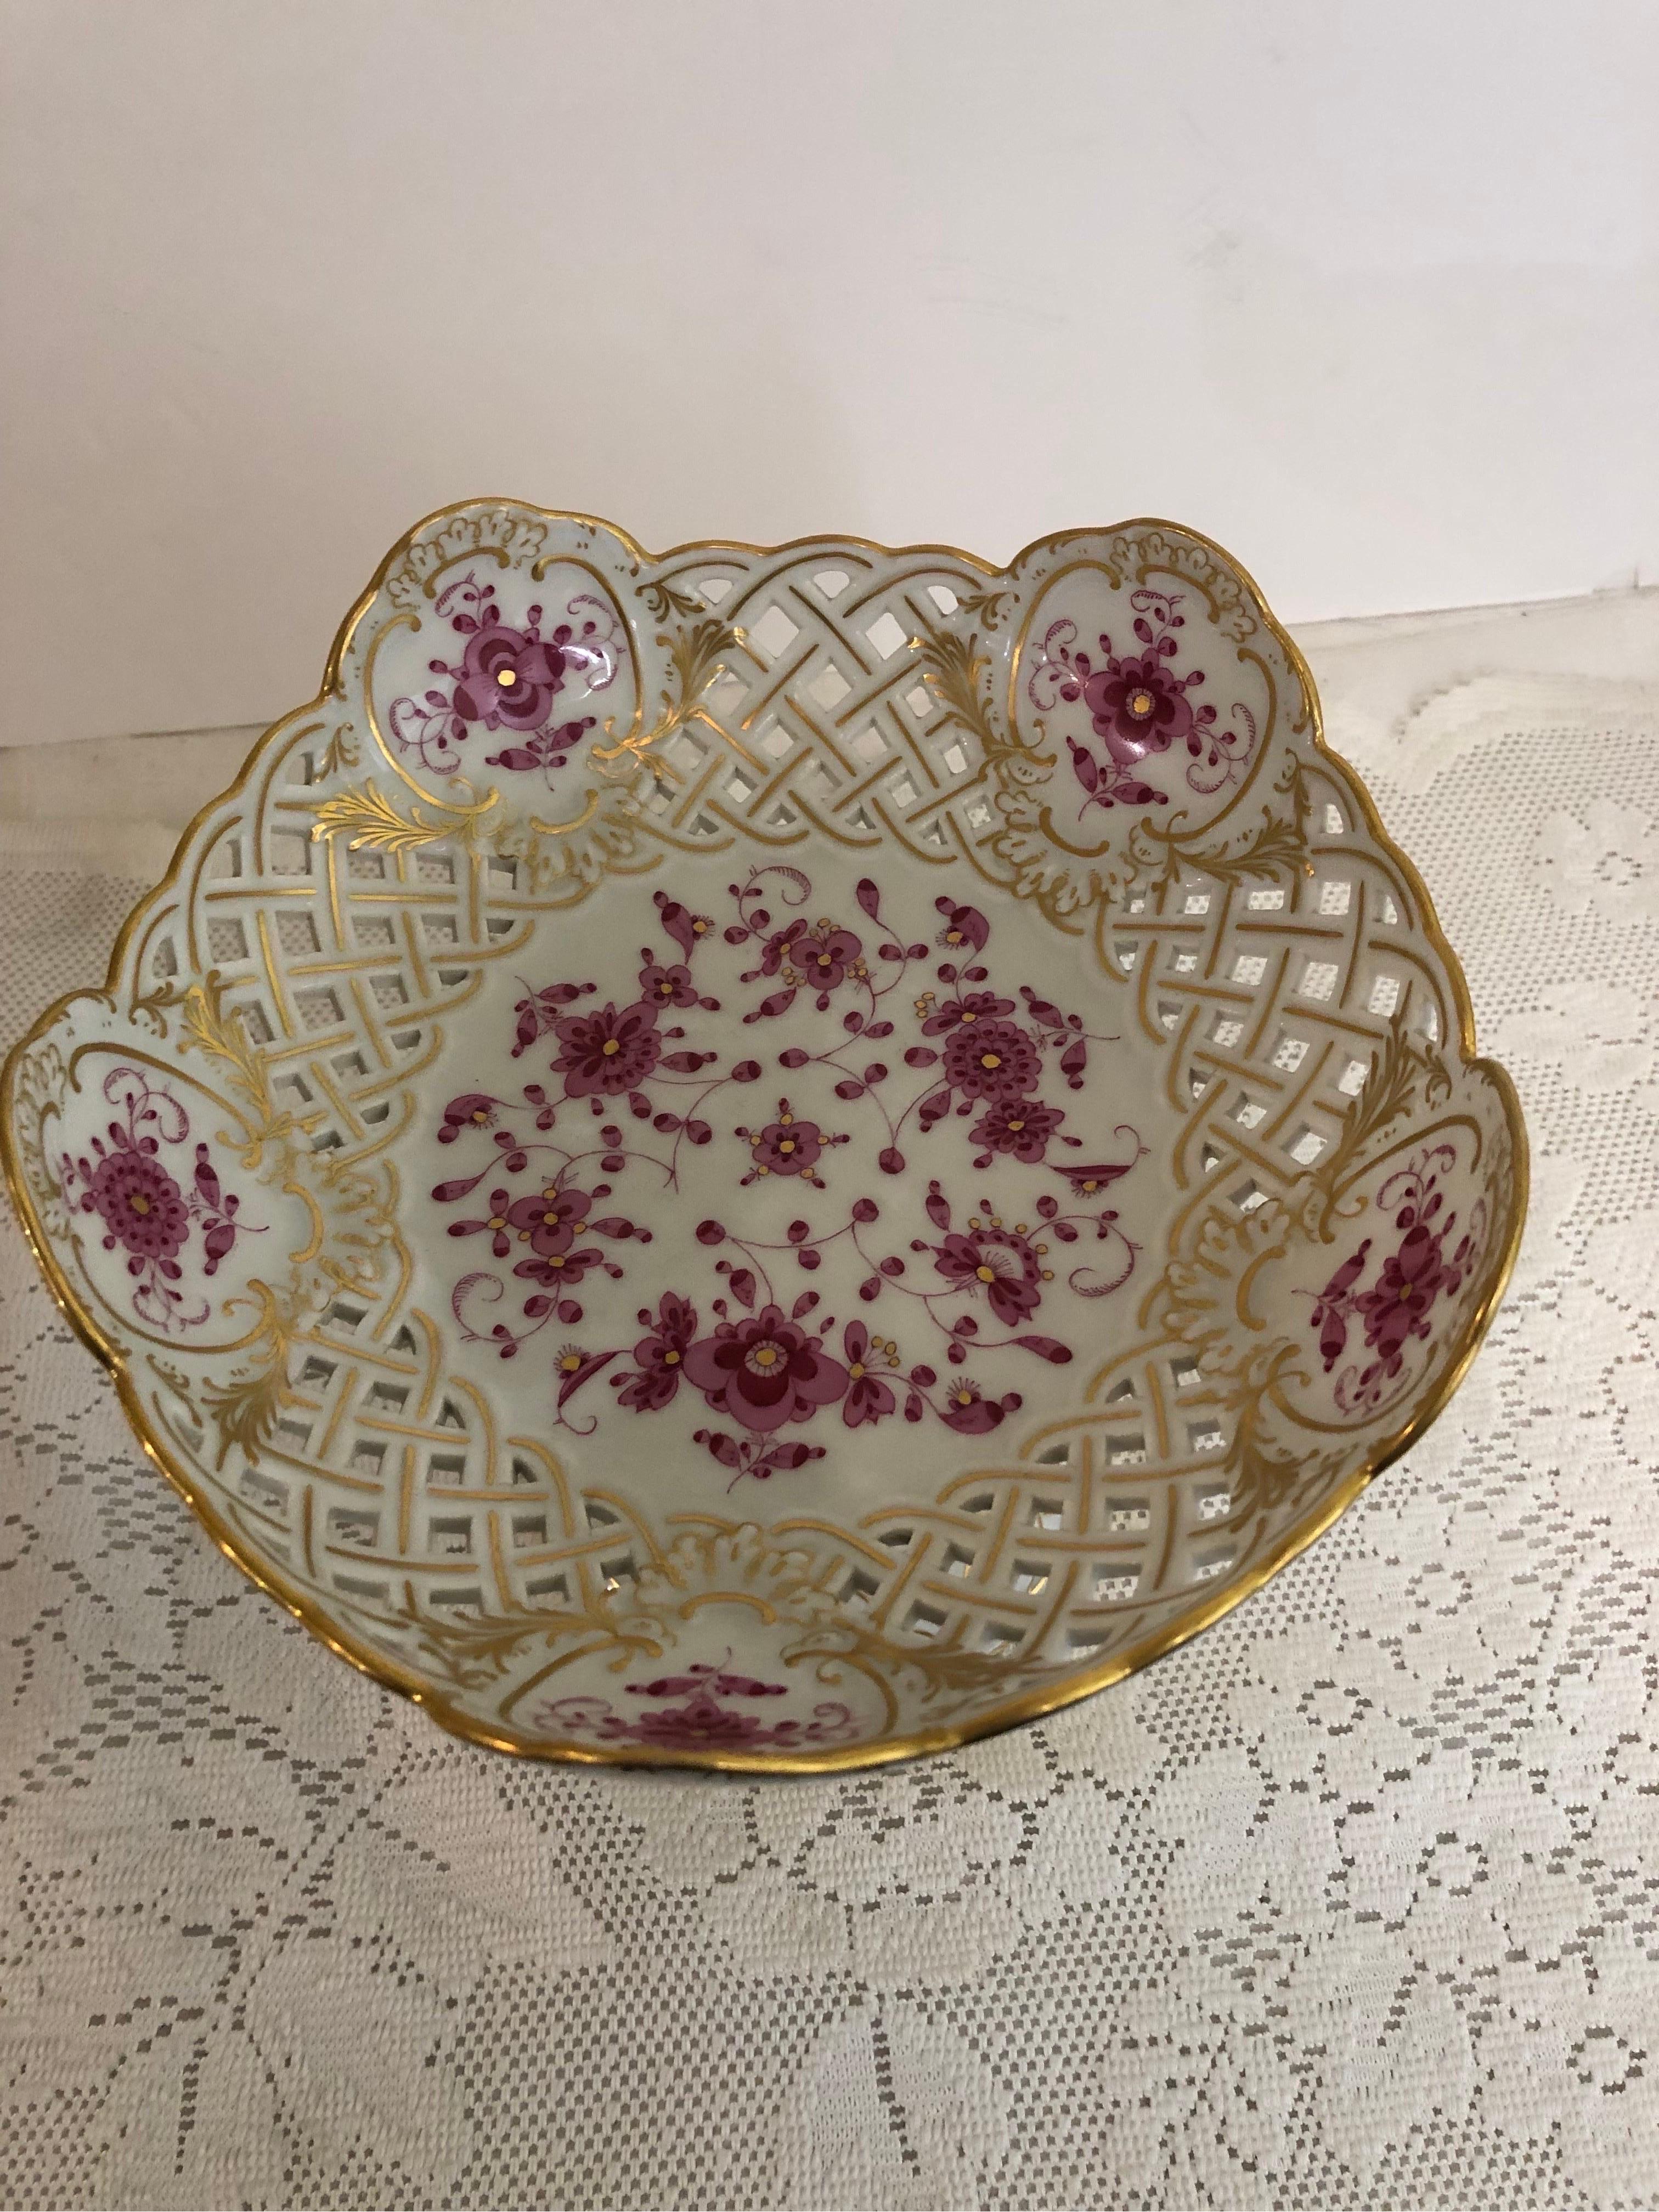 This Meissen reticulated purple Indian compote is very rare and extremely hard to find. It is a beautiful serving compote or decoration for your table, your sideboard or your cabinet. It would make a stunning addition to any table setting. First of